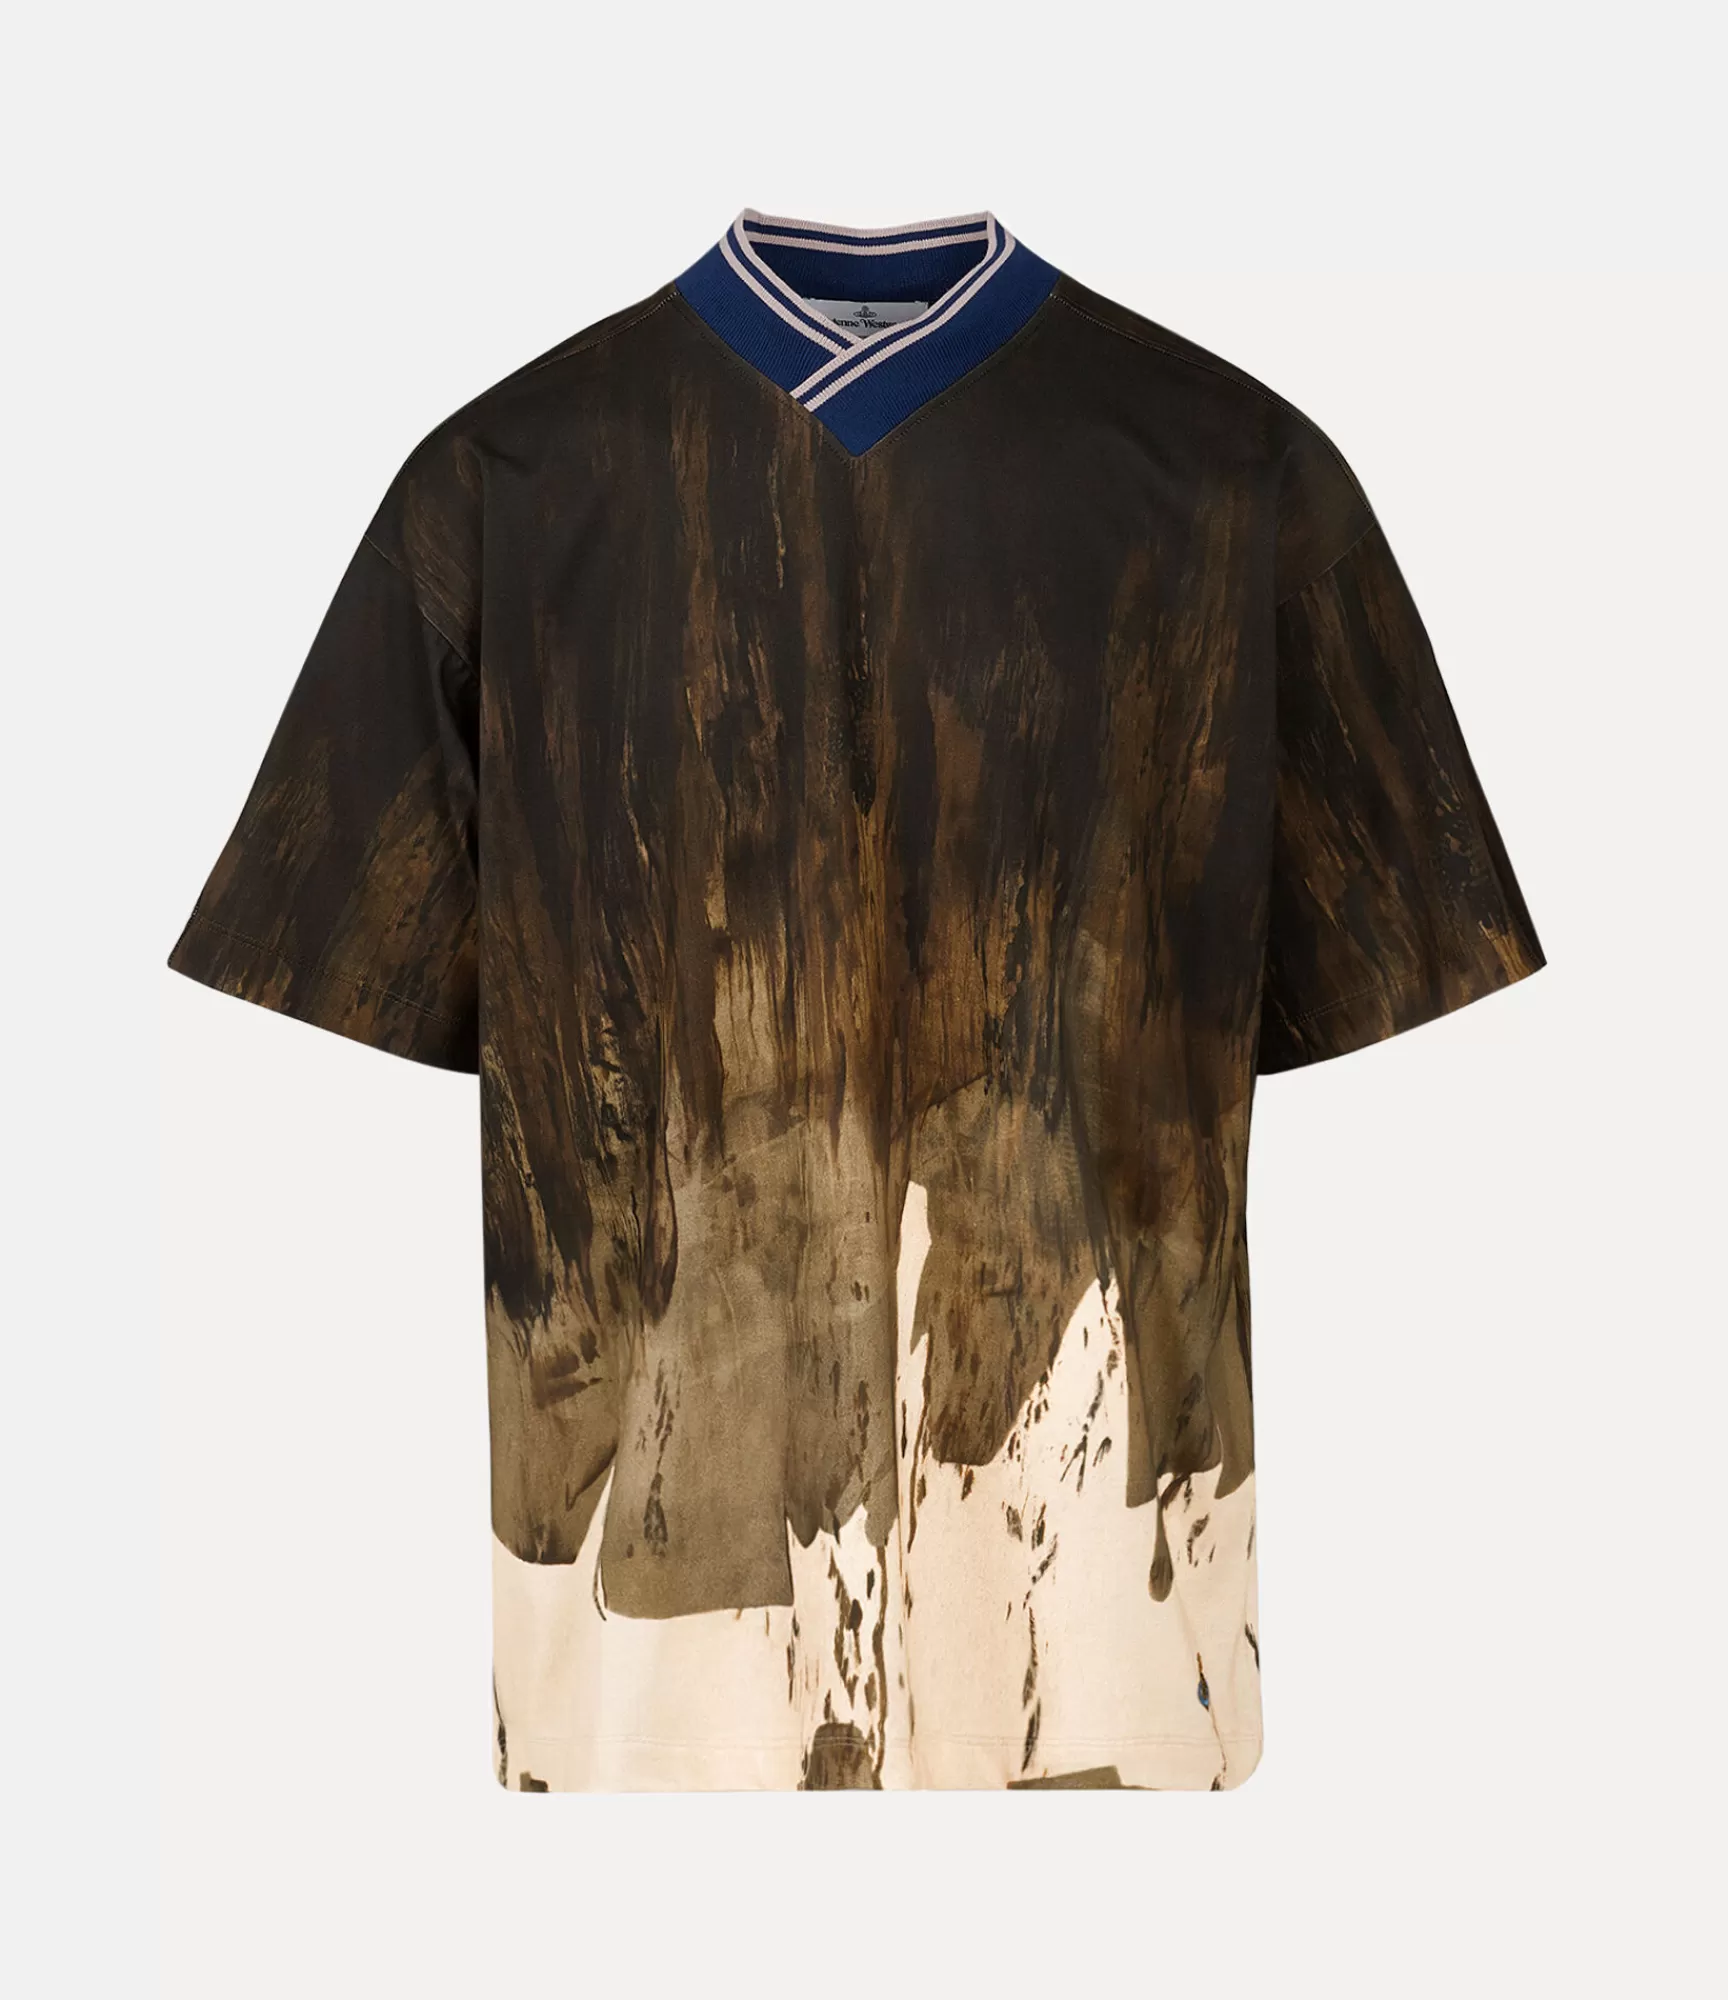 Vivienne Westwood T-Shirts and Polos | Sweatshirts and T-Shirts*TEAM JERSEY Brown